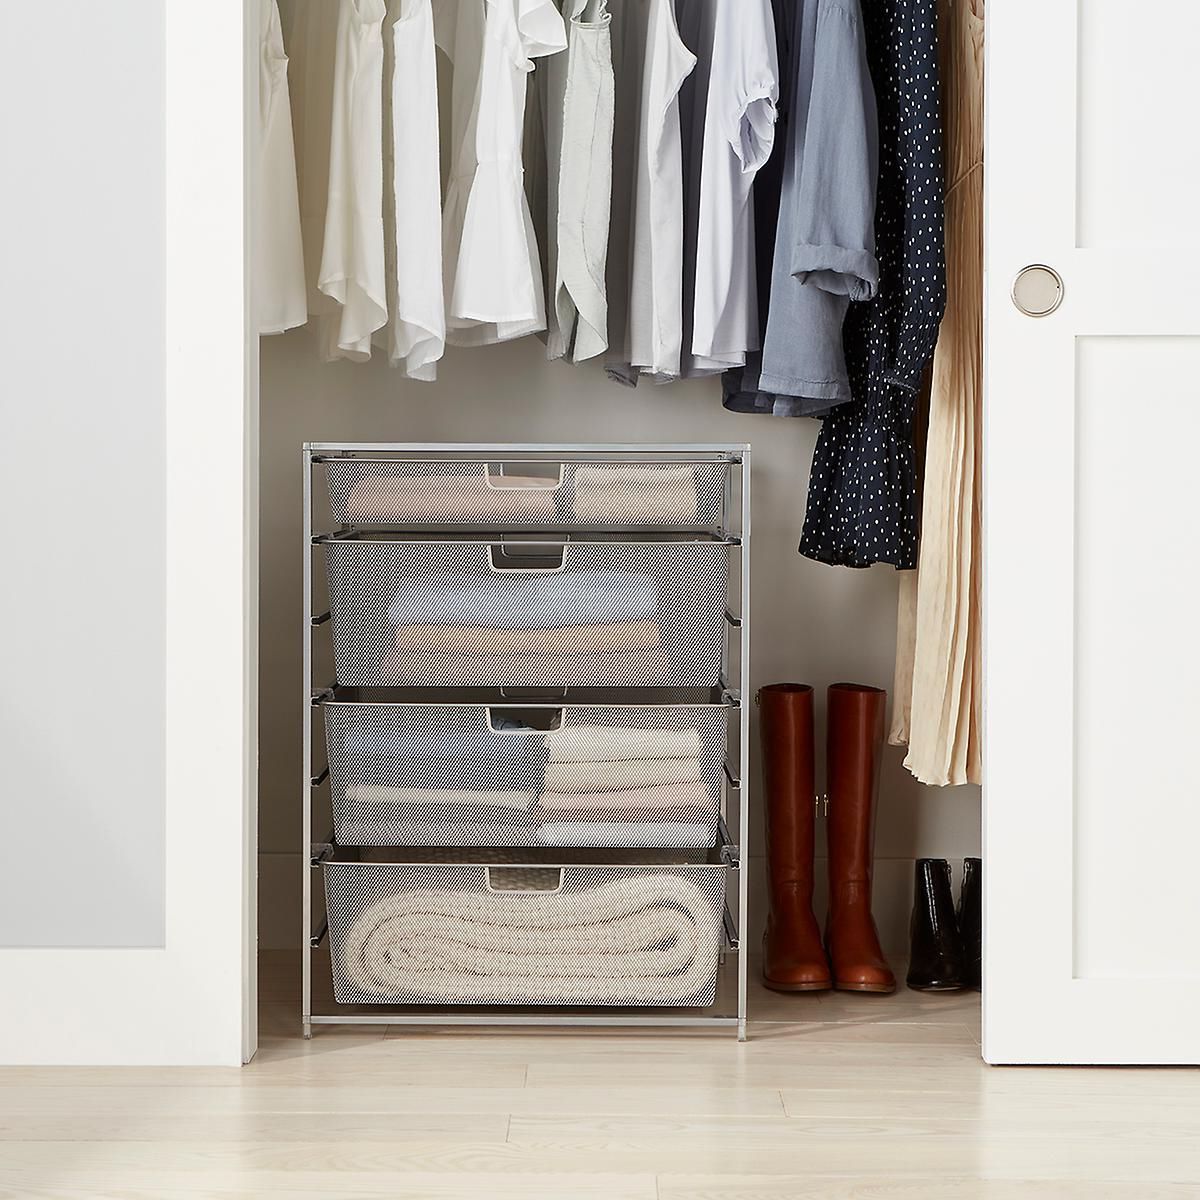 Widely Used 35 Best Closet Organization Ideas To Maximize Space With Regard To Clothes Organizer Wardrobes (View 9 of 10)